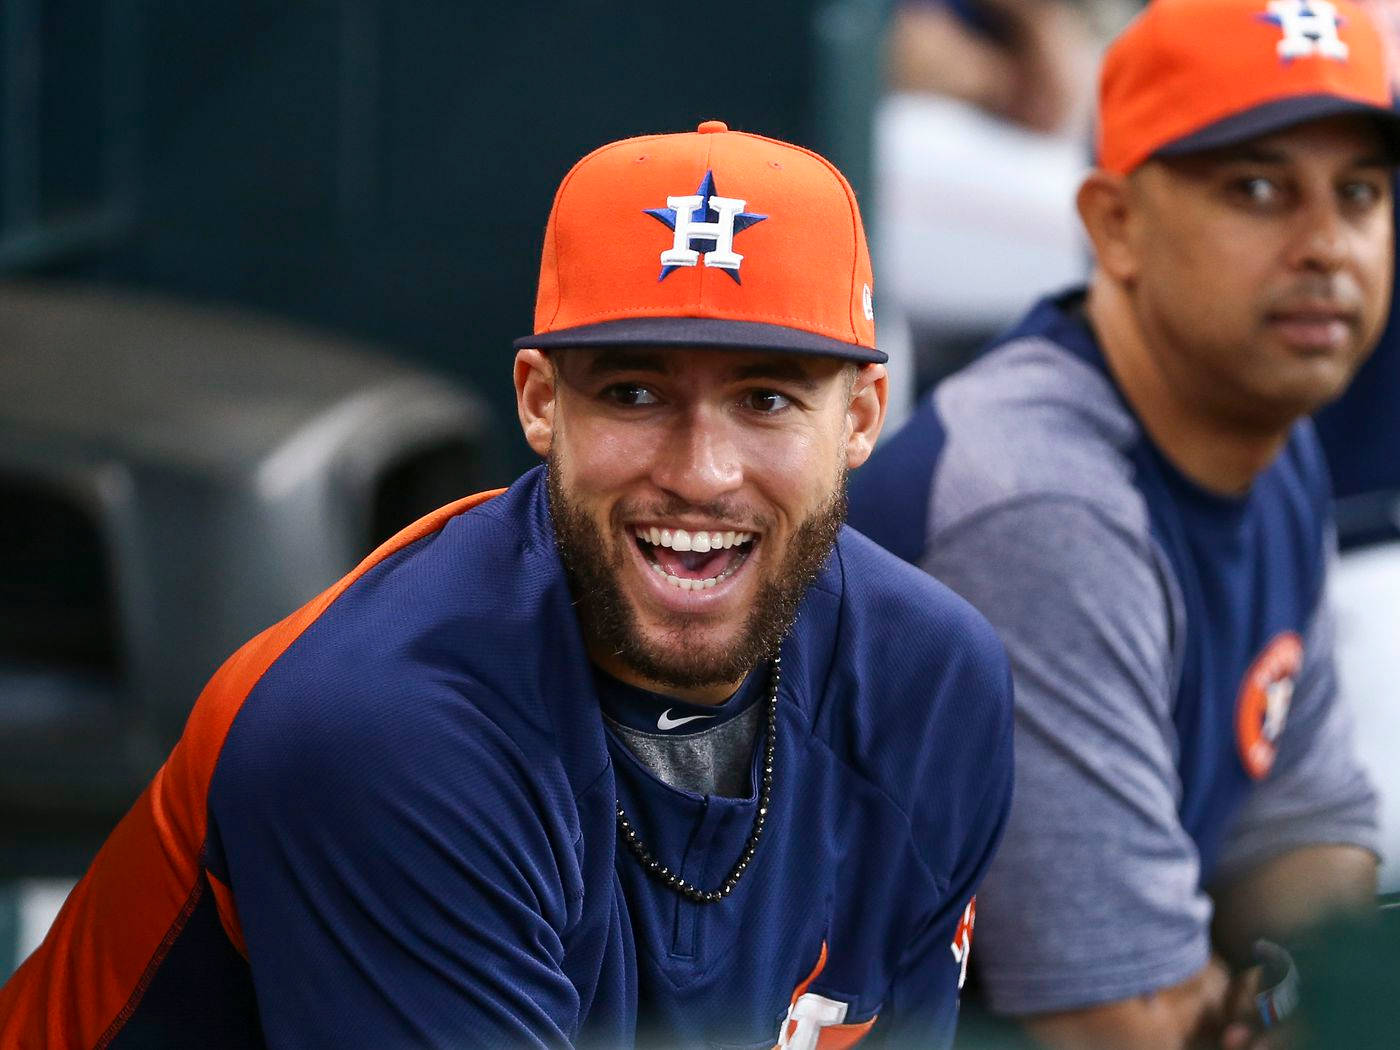 Download George Springer Excited And Mouth Open Wallpaper